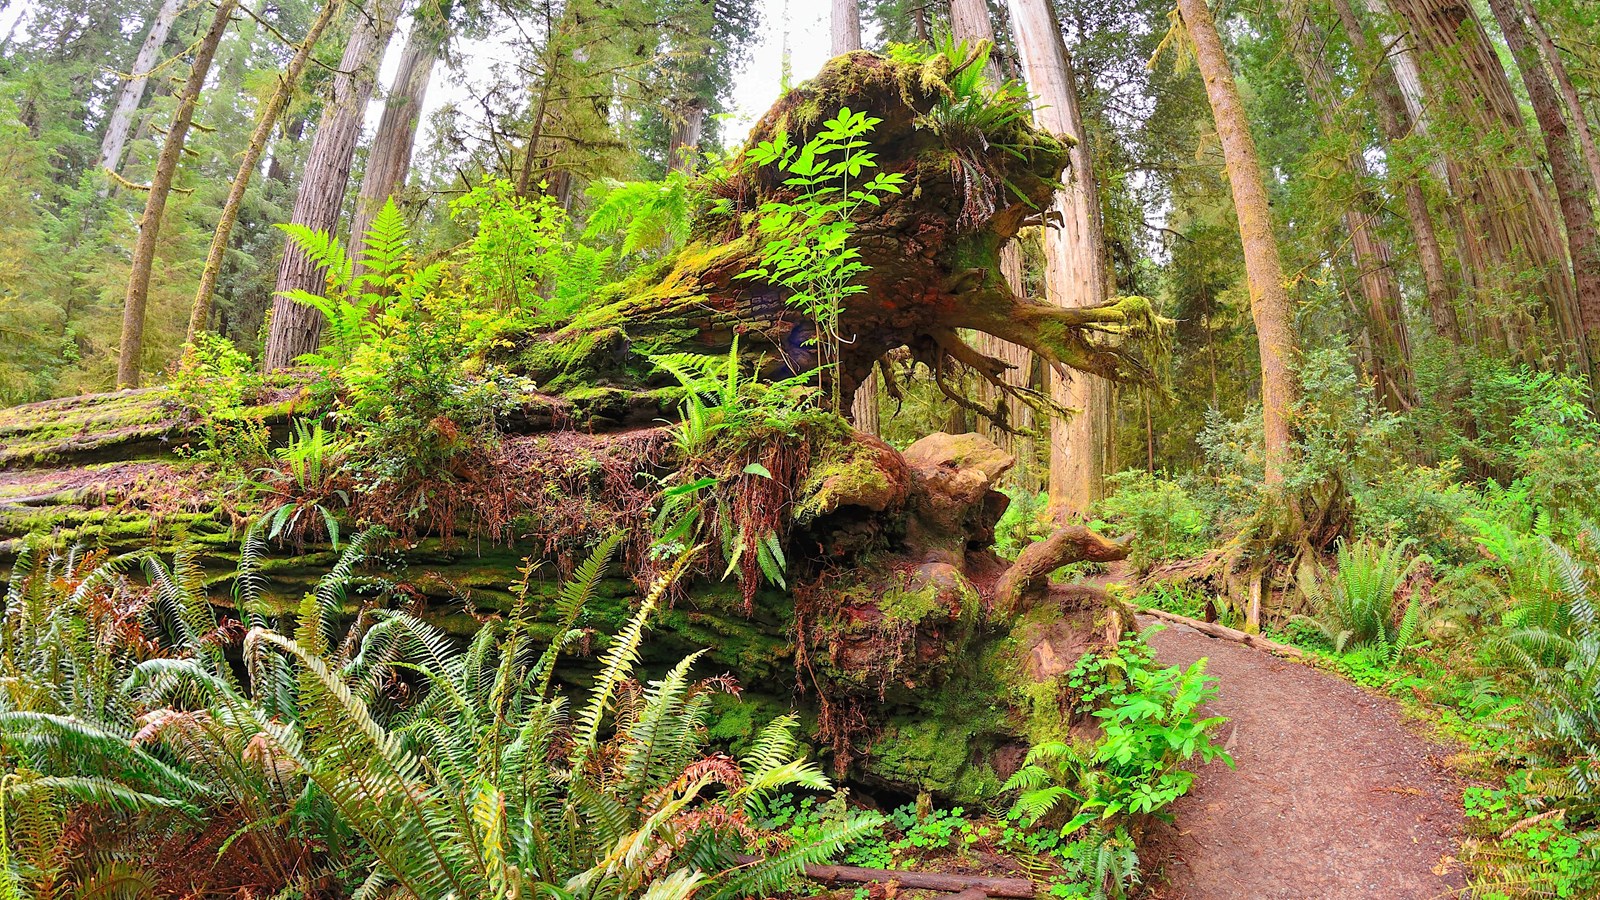 A trail passes a fallen redwood root that is covered in ferns.